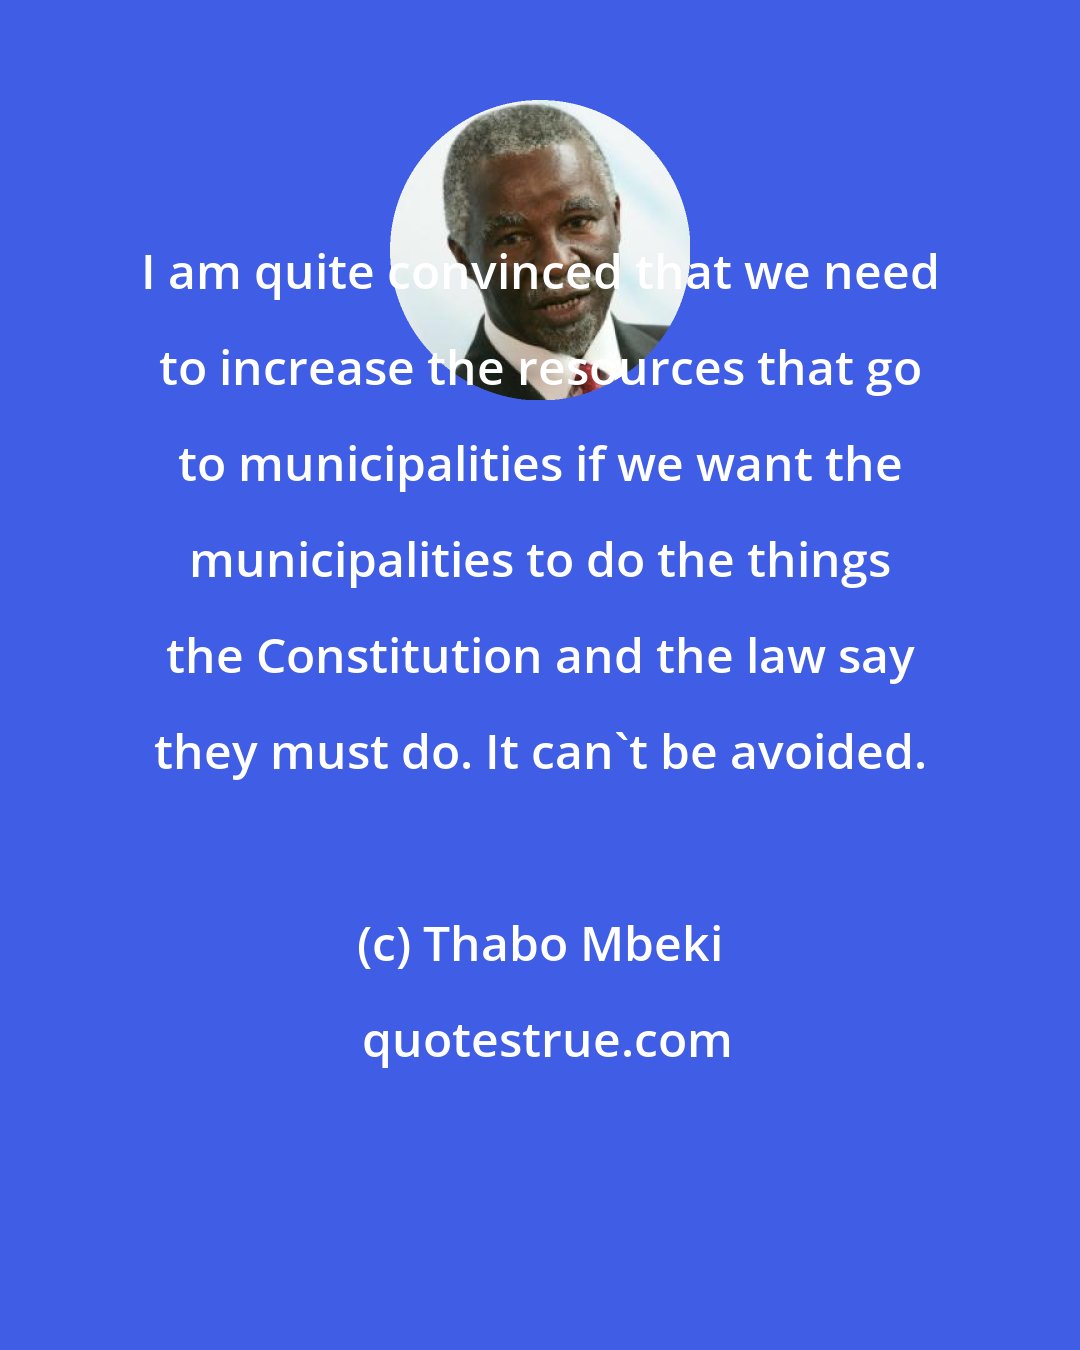 Thabo Mbeki: I am quite convinced that we need to increase the resources that go to municipalities if we want the municipalities to do the things the Constitution and the law say they must do. It can't be avoided.